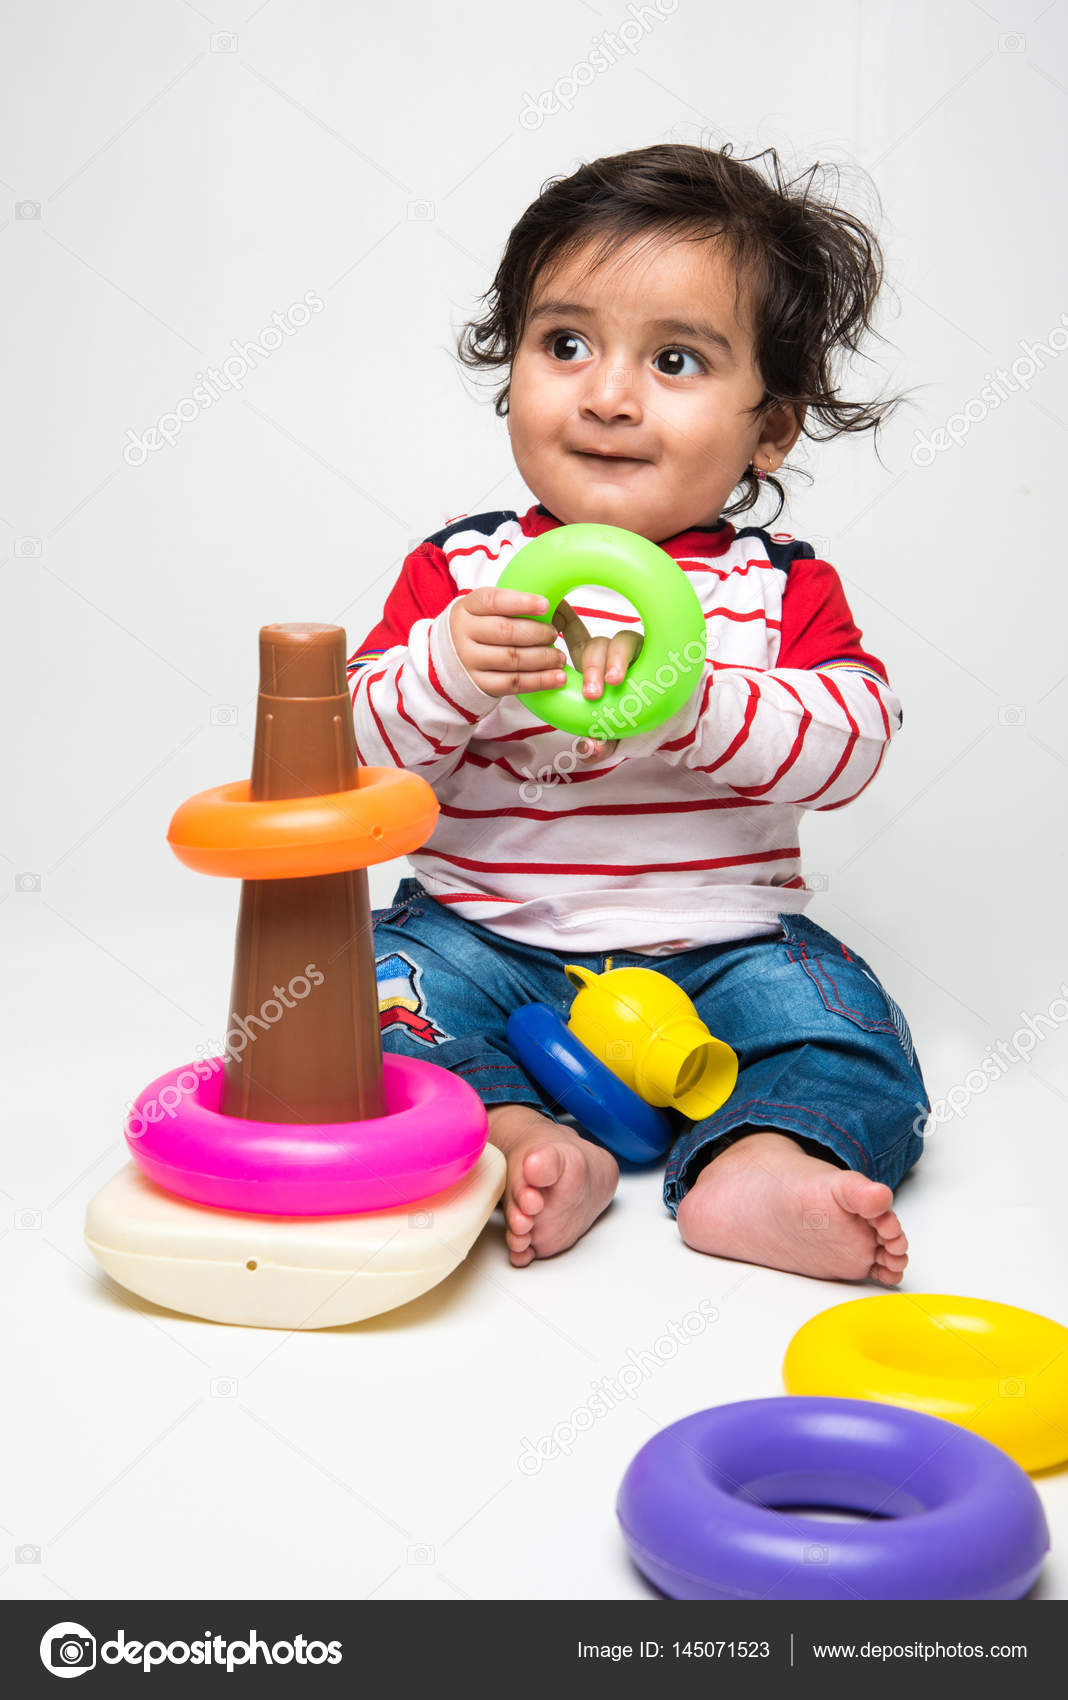 small baby playing toys